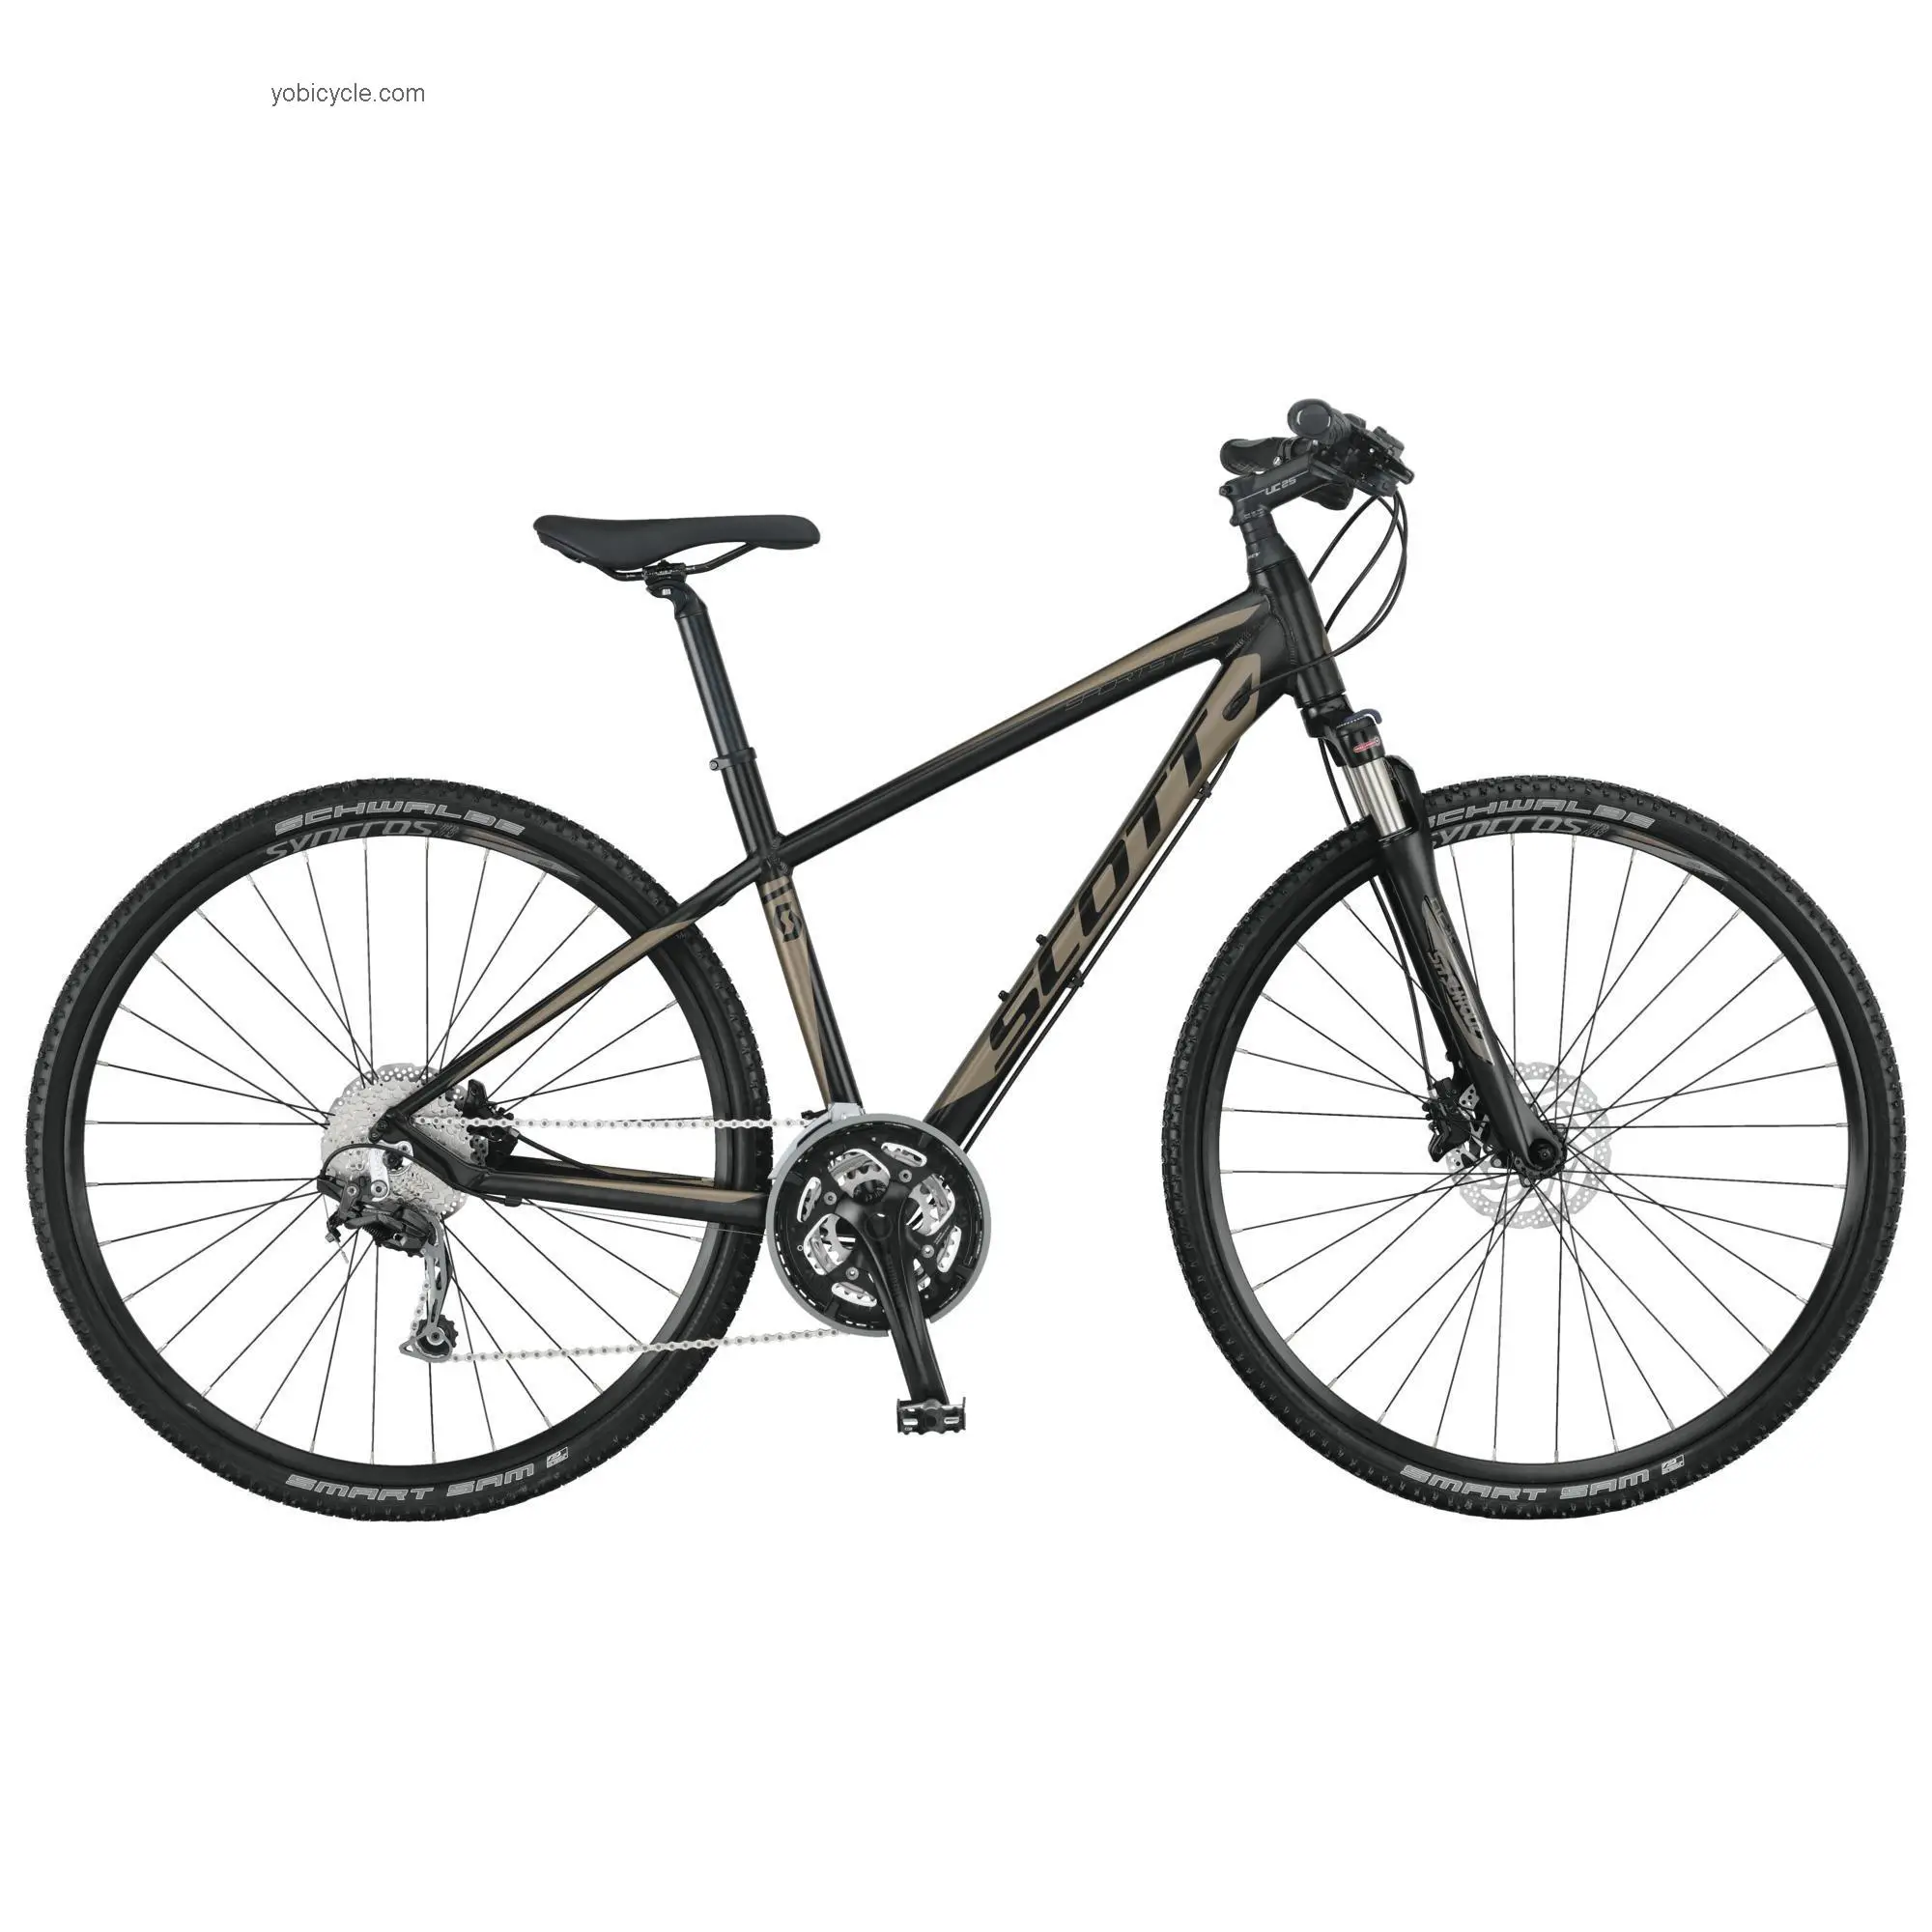 Scott Sportster 20 Solution 2014 comparison online with competitors